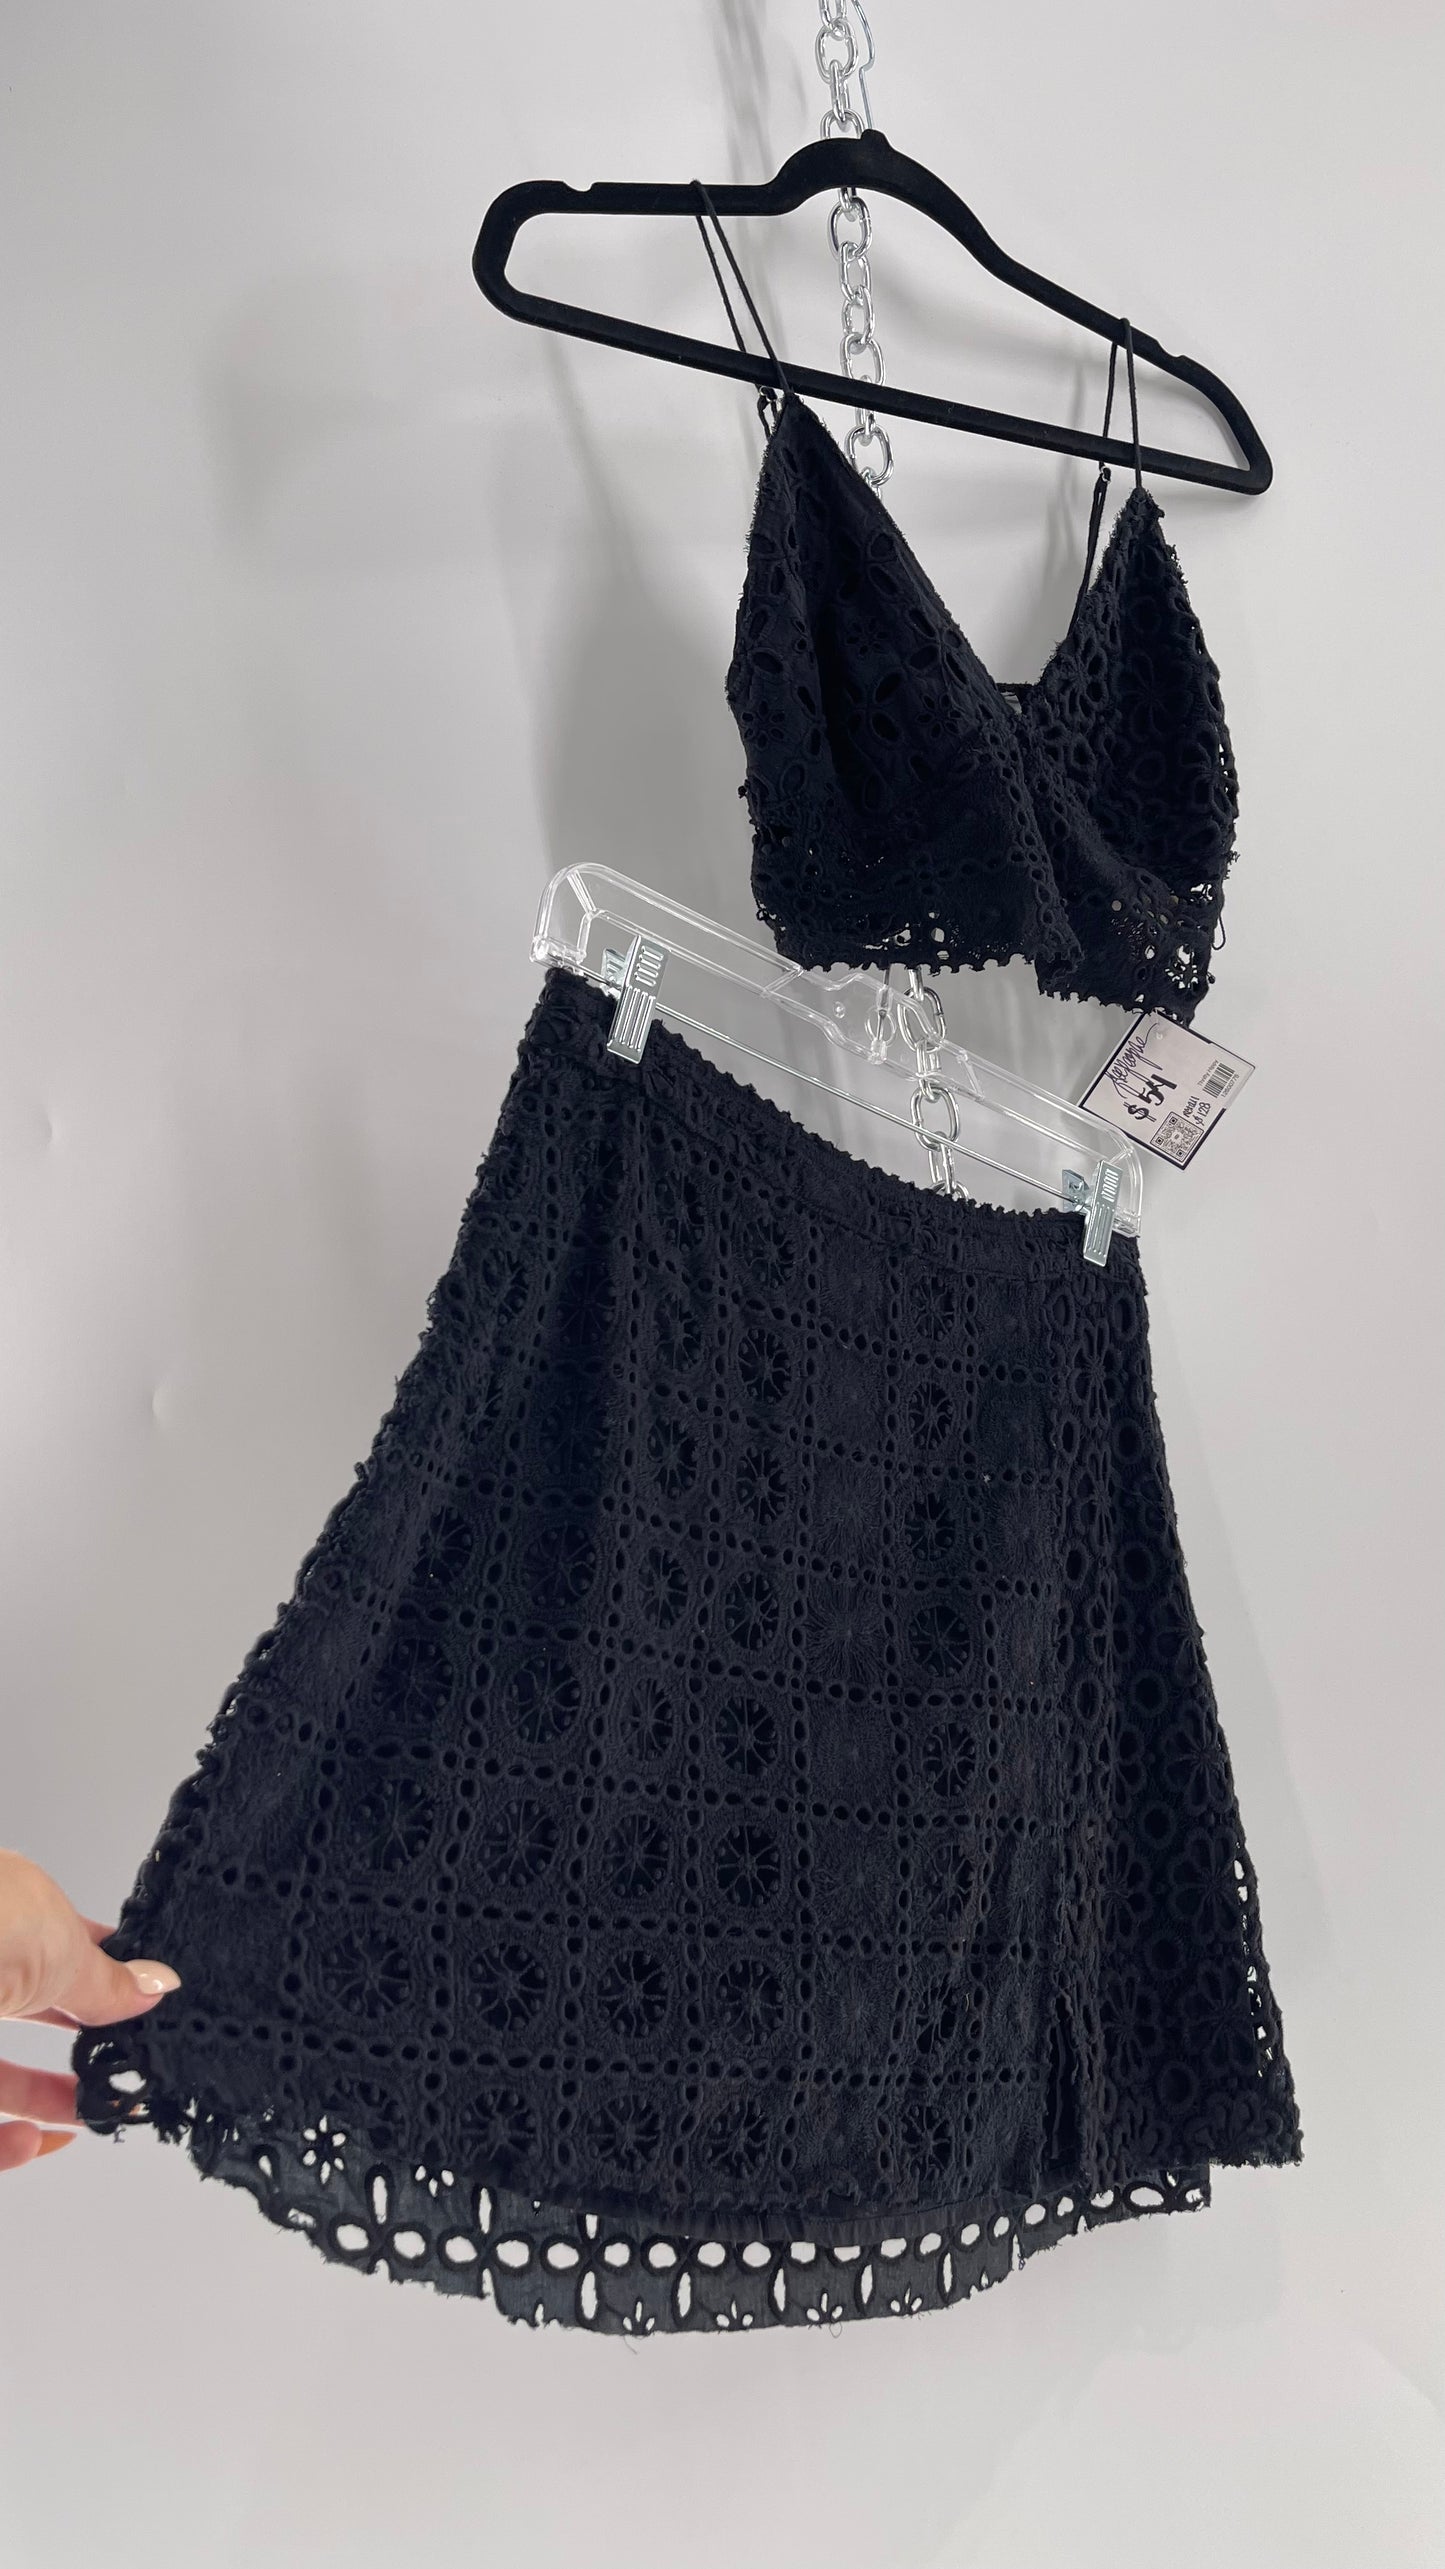 Free People Black Eyelet Lace Mini Skirt and Bustier Set (6)